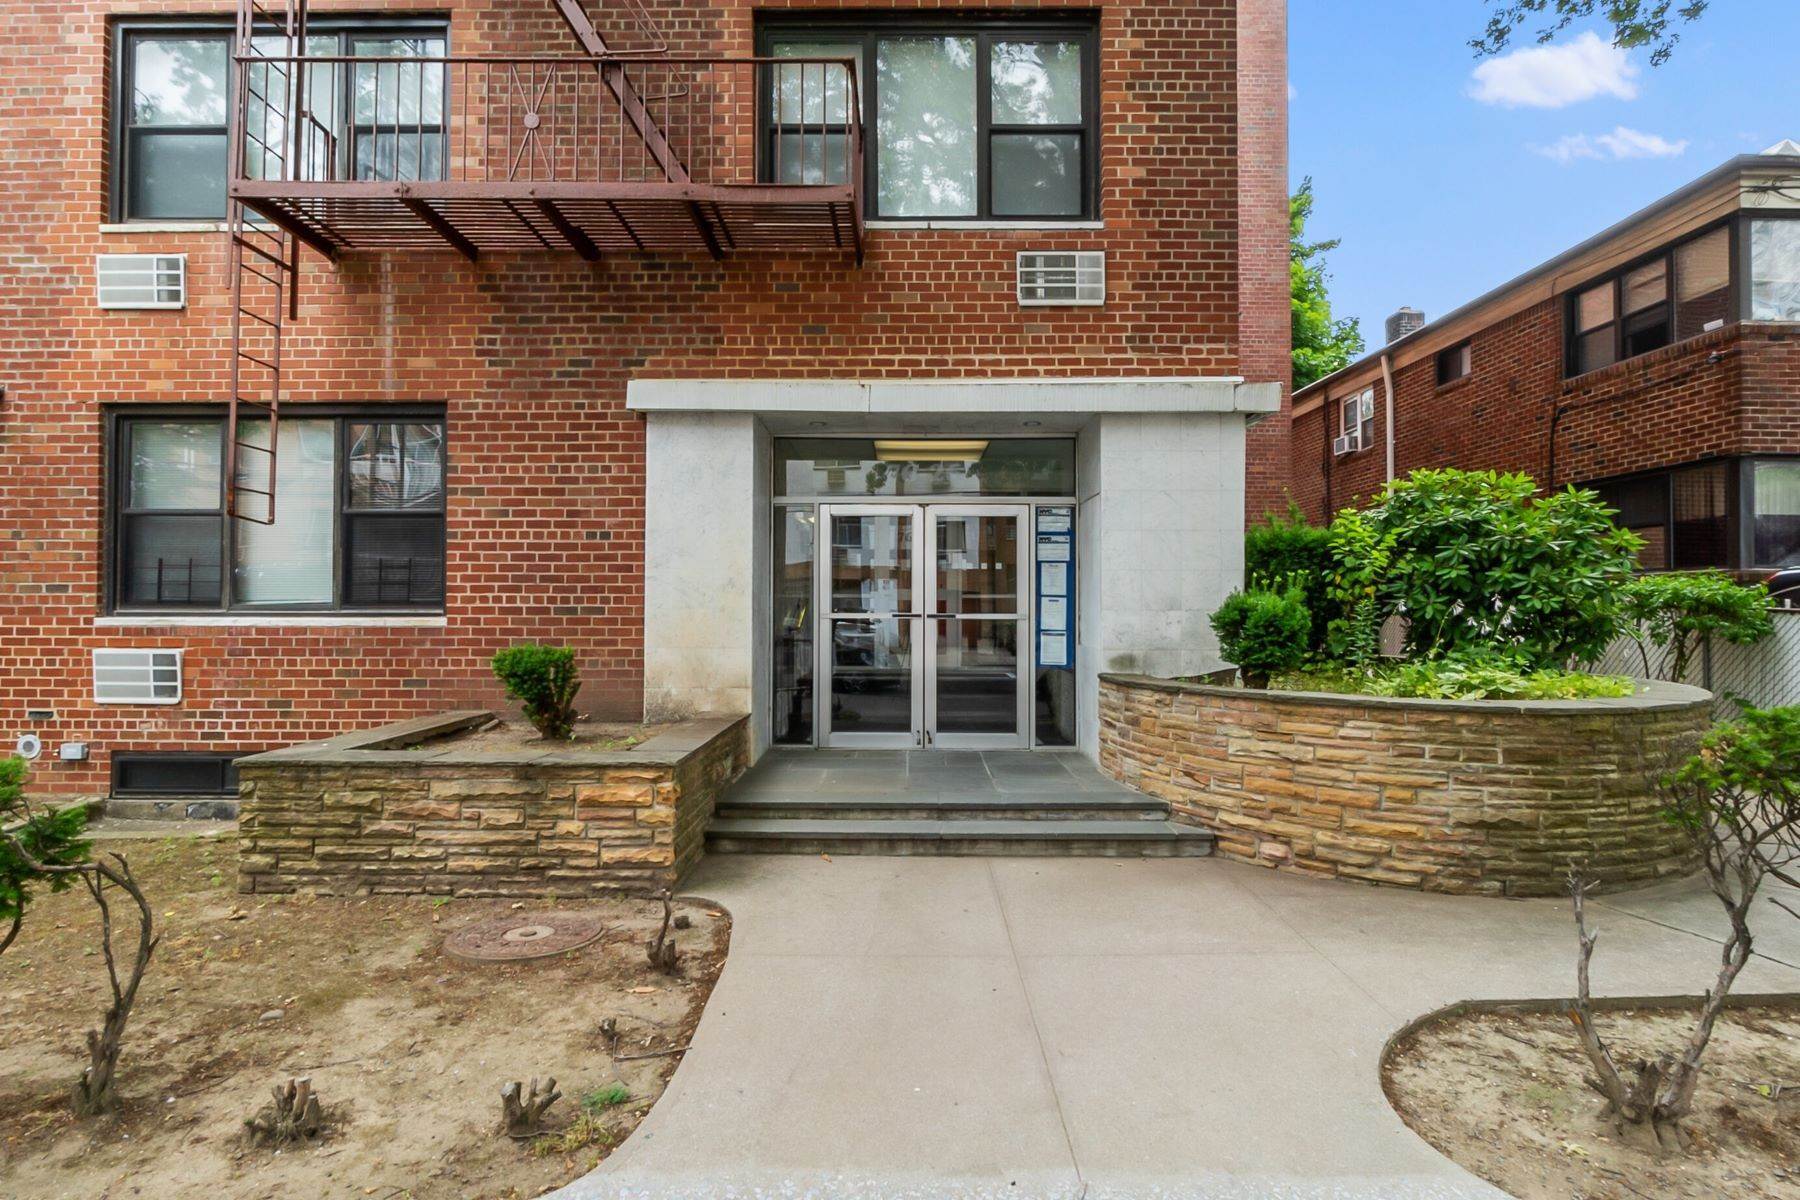 Co-op Properties for Sale at 76-26 113 Th Street, Forest Hills, NY, 11375 76-26 113 Th Street, Unit# 2D Forest Hills, New York 11375 United States